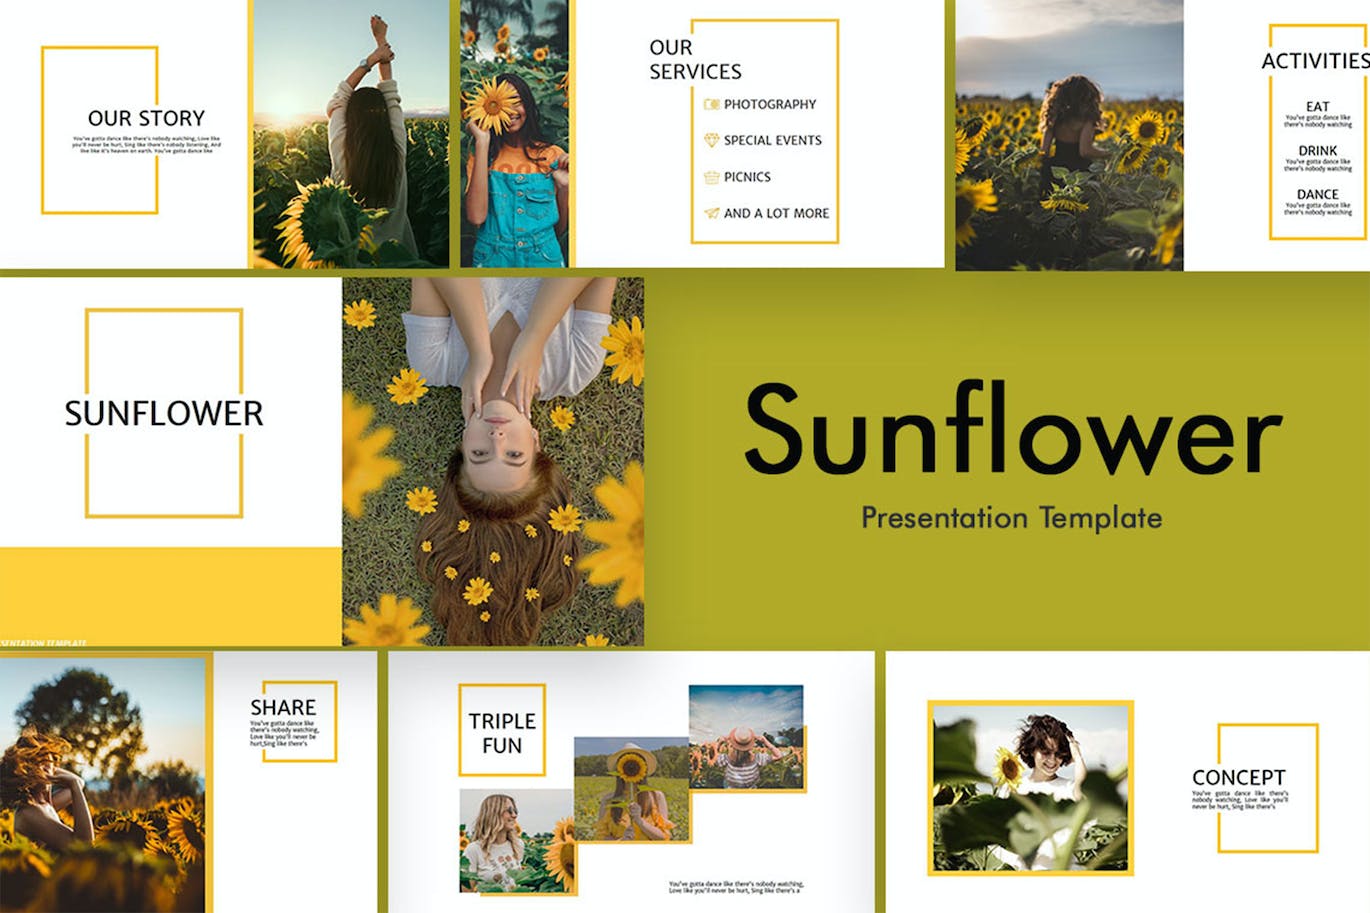 A selection of images of colorful presentation template slides with pictures of sunflower.